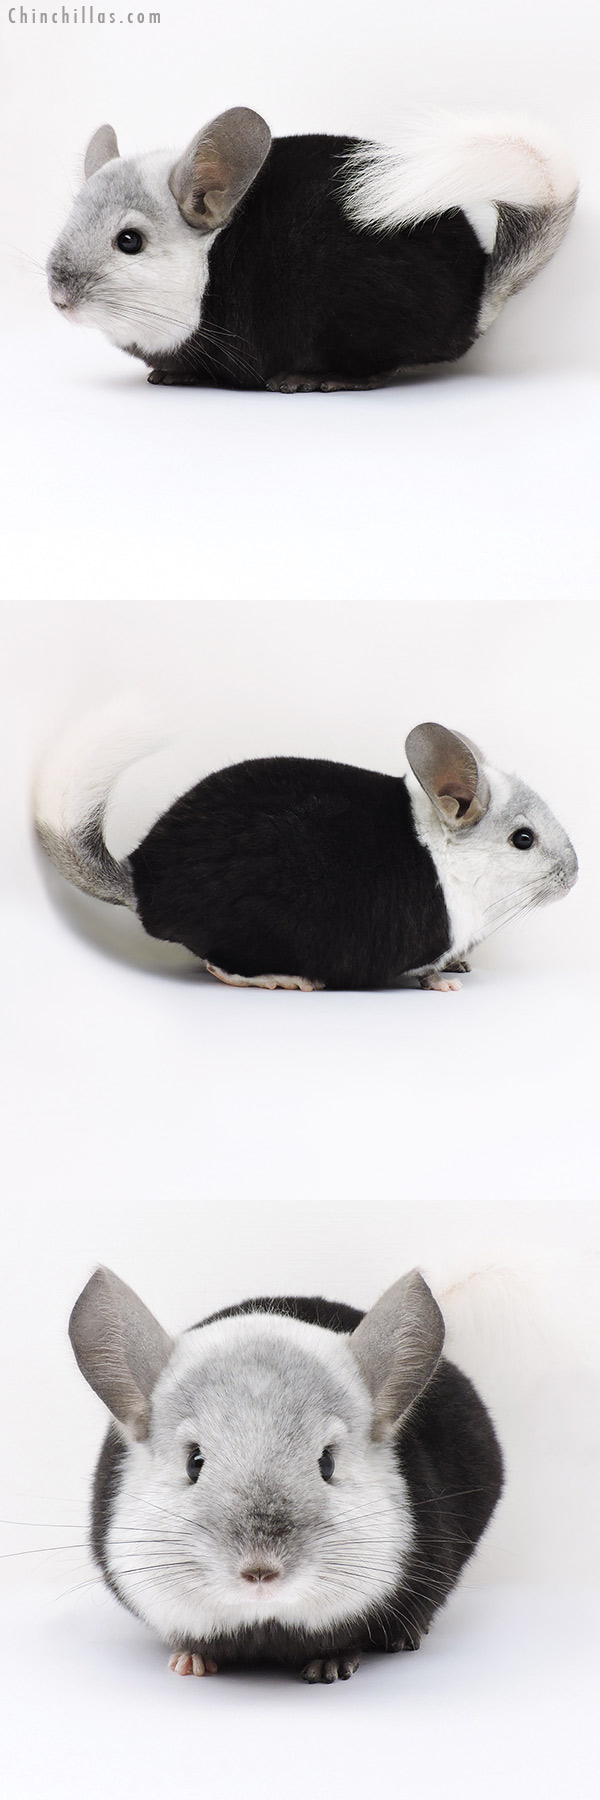 Chinchilla or related item offered for sale or export on Chinchillas.com - 16366 Extreme Ebony & White Mosaic ( Locken Carrier ) Male Chinchilla